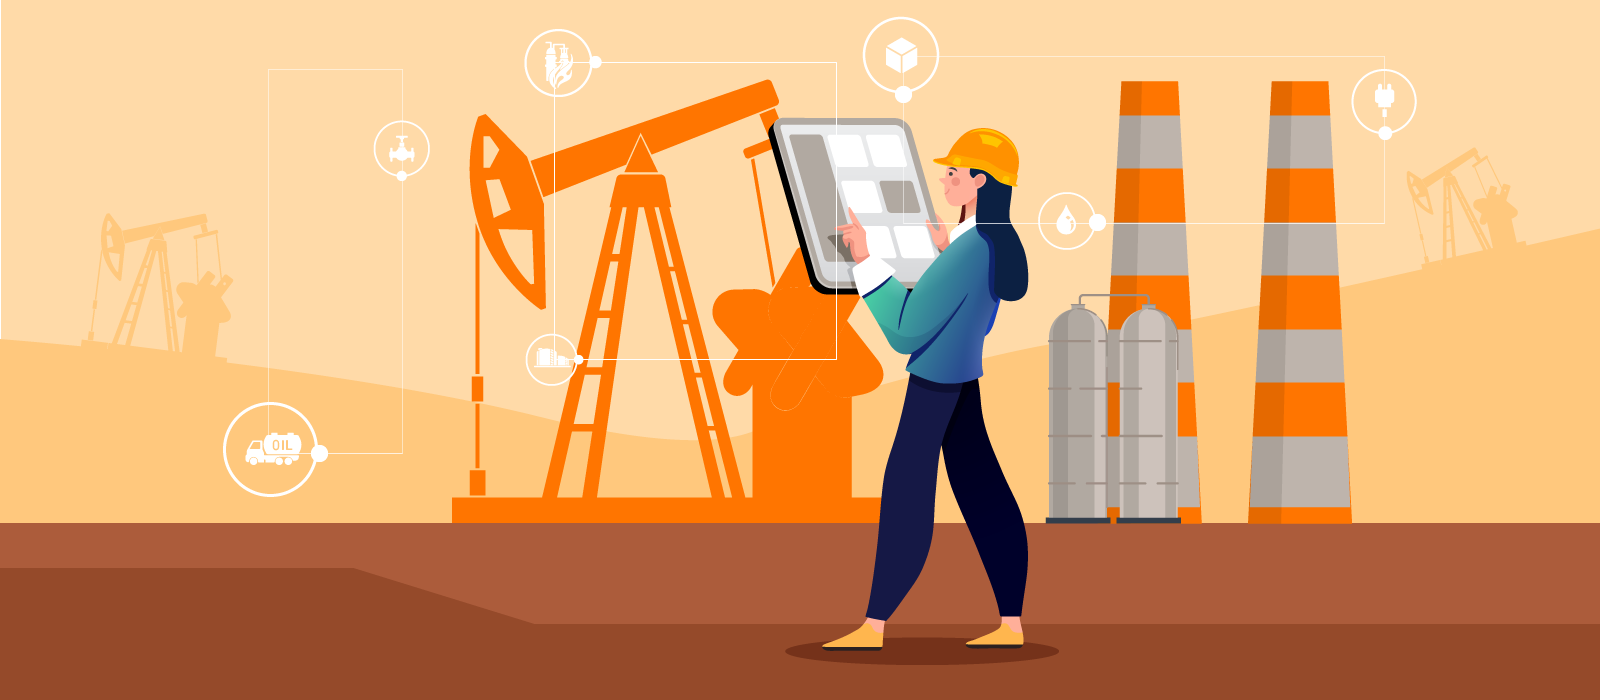 A person managing oil and gas mining using technologies